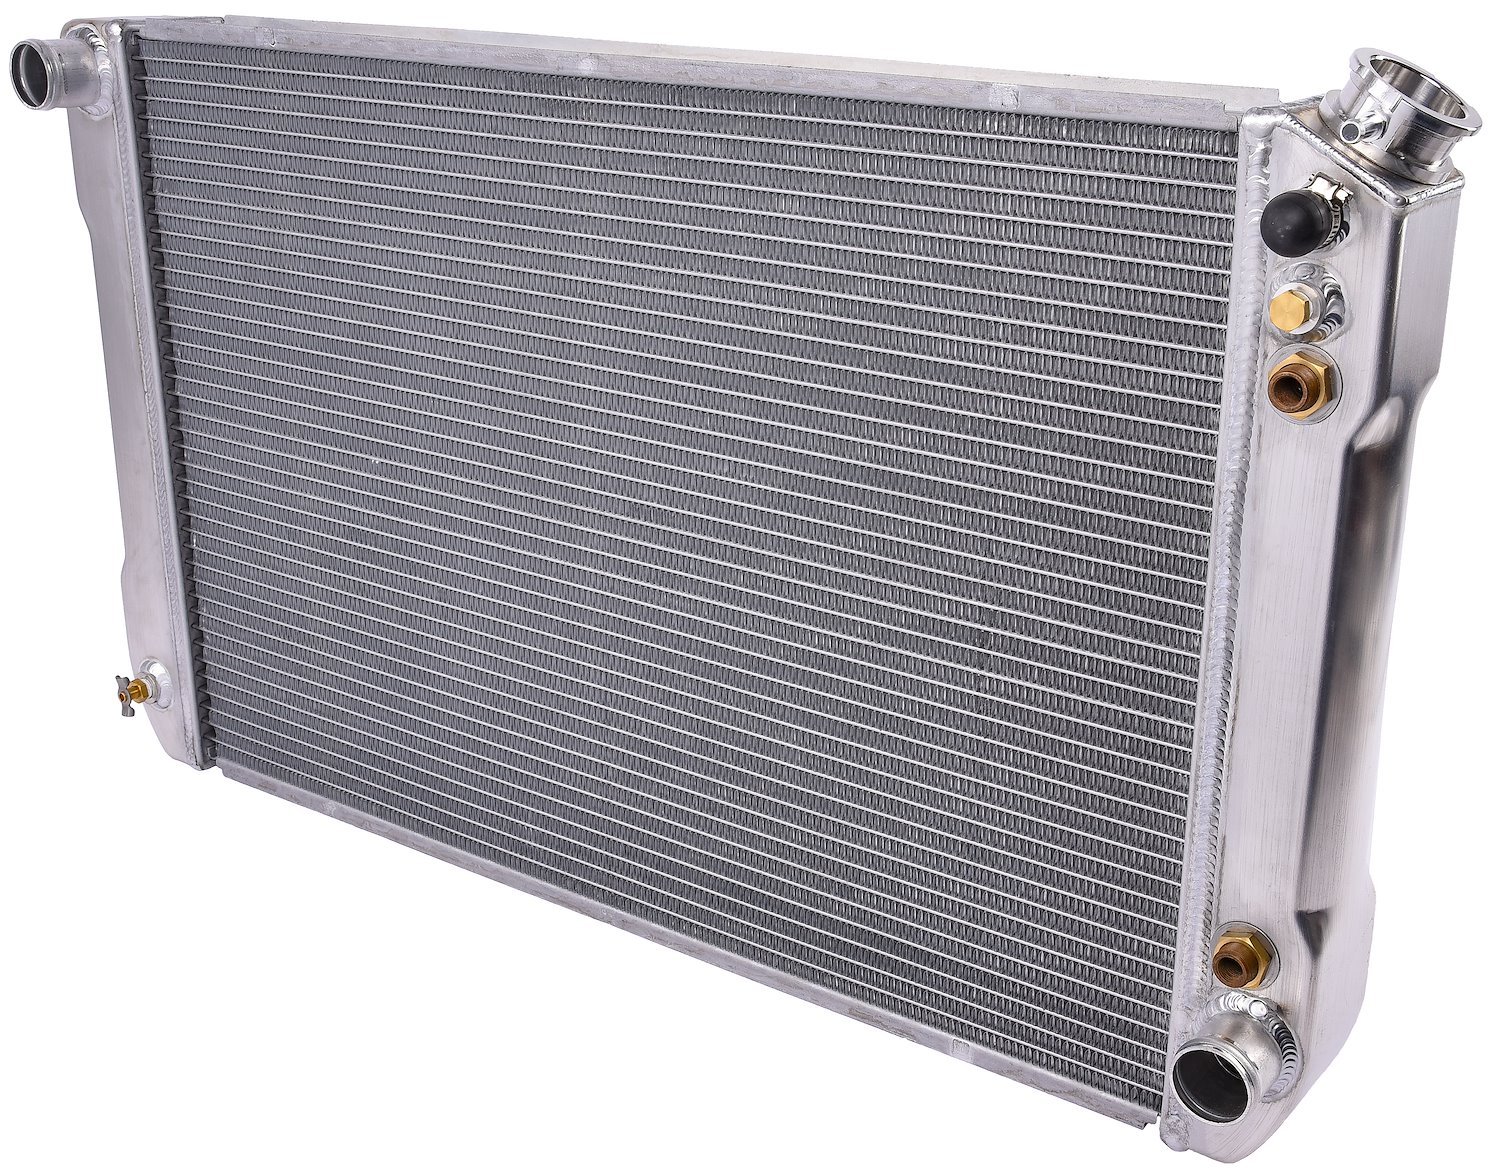 Ready Fit Aluminum Radiator Fits Select 1965-1987 Buick, Cadillac, Chevrolet, Olds, Pontiac, Cars & Select 1972-1998 GM Trucks